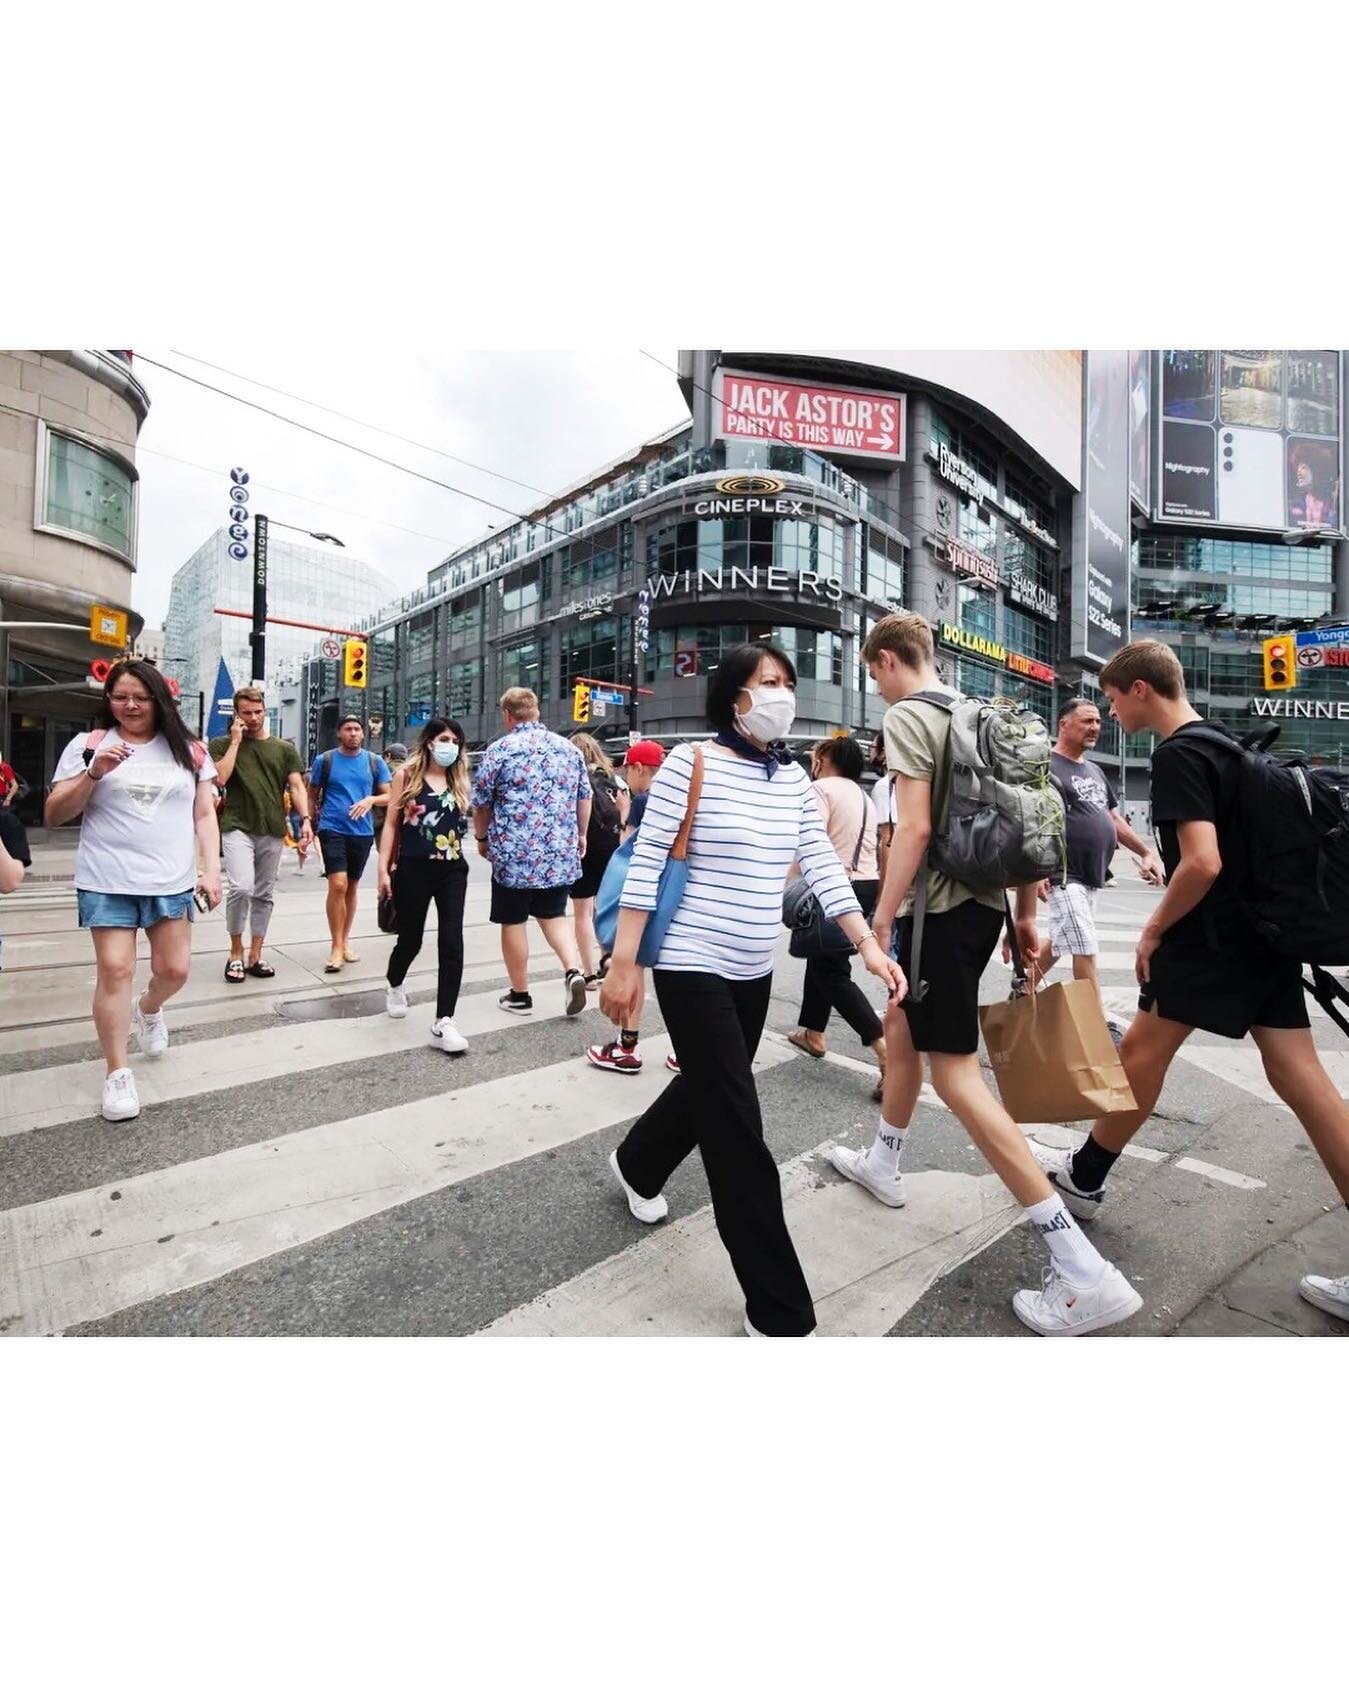 We are excited to see the traffic levels trending higher each and every month in #Canada&rsquo;s key office core markets. Not only is footfall up, the engagement of those working downtown is also up as they interact with co-workers, shop, and access 